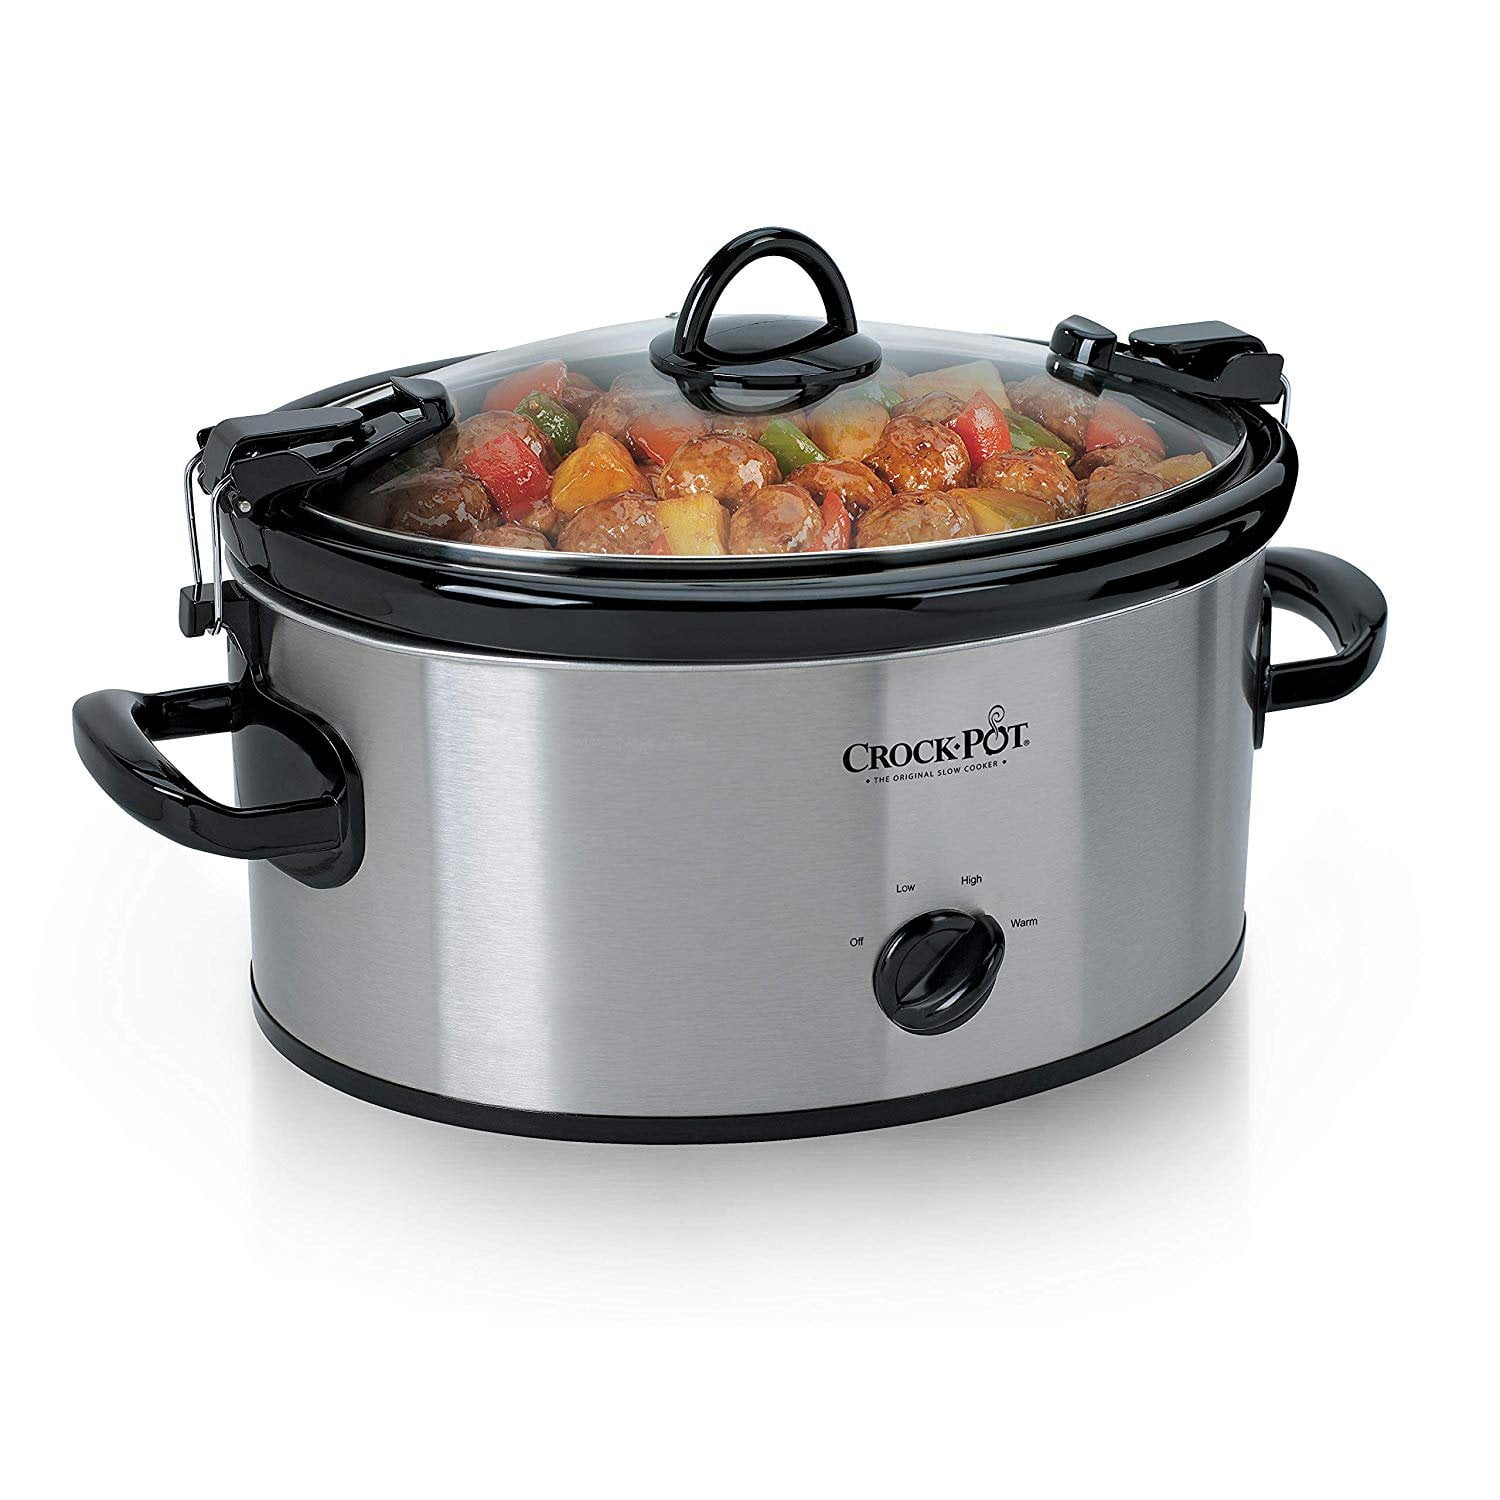 Stainless Steel Crock-Pot SCV700-SS Oval Manual Slow Cooker 